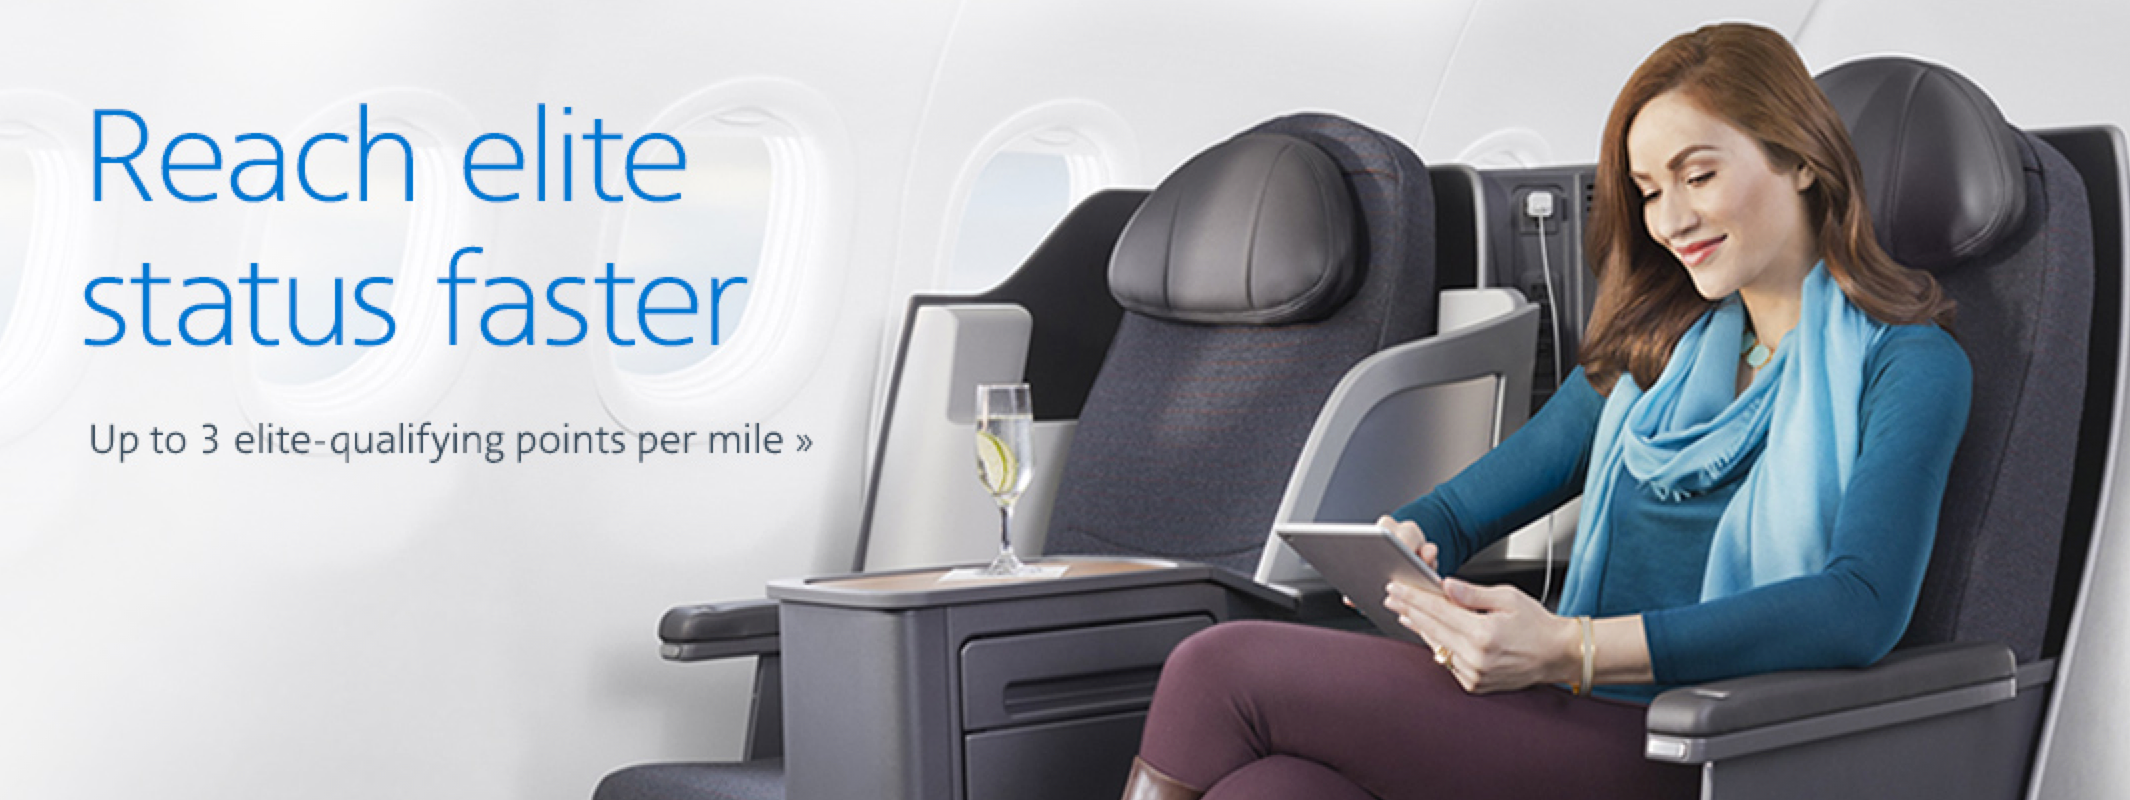 Earn up to 3 EQPs per mile flown on American Airlines through Dec 31st